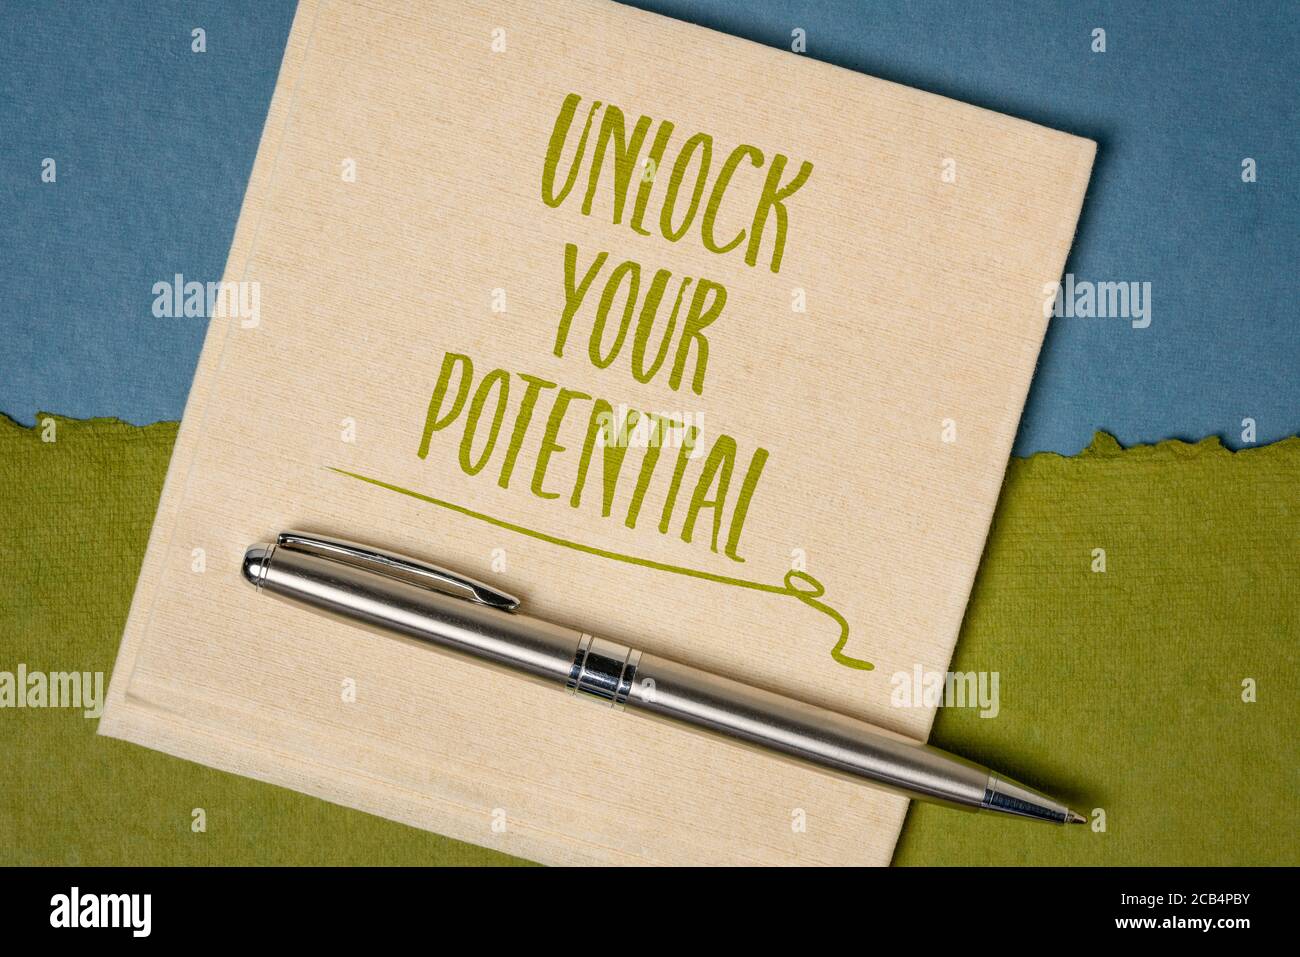 Unlock your potential inspirational reminder note - handwriting on a napkin, self improvement and personal development concept Stock Photo